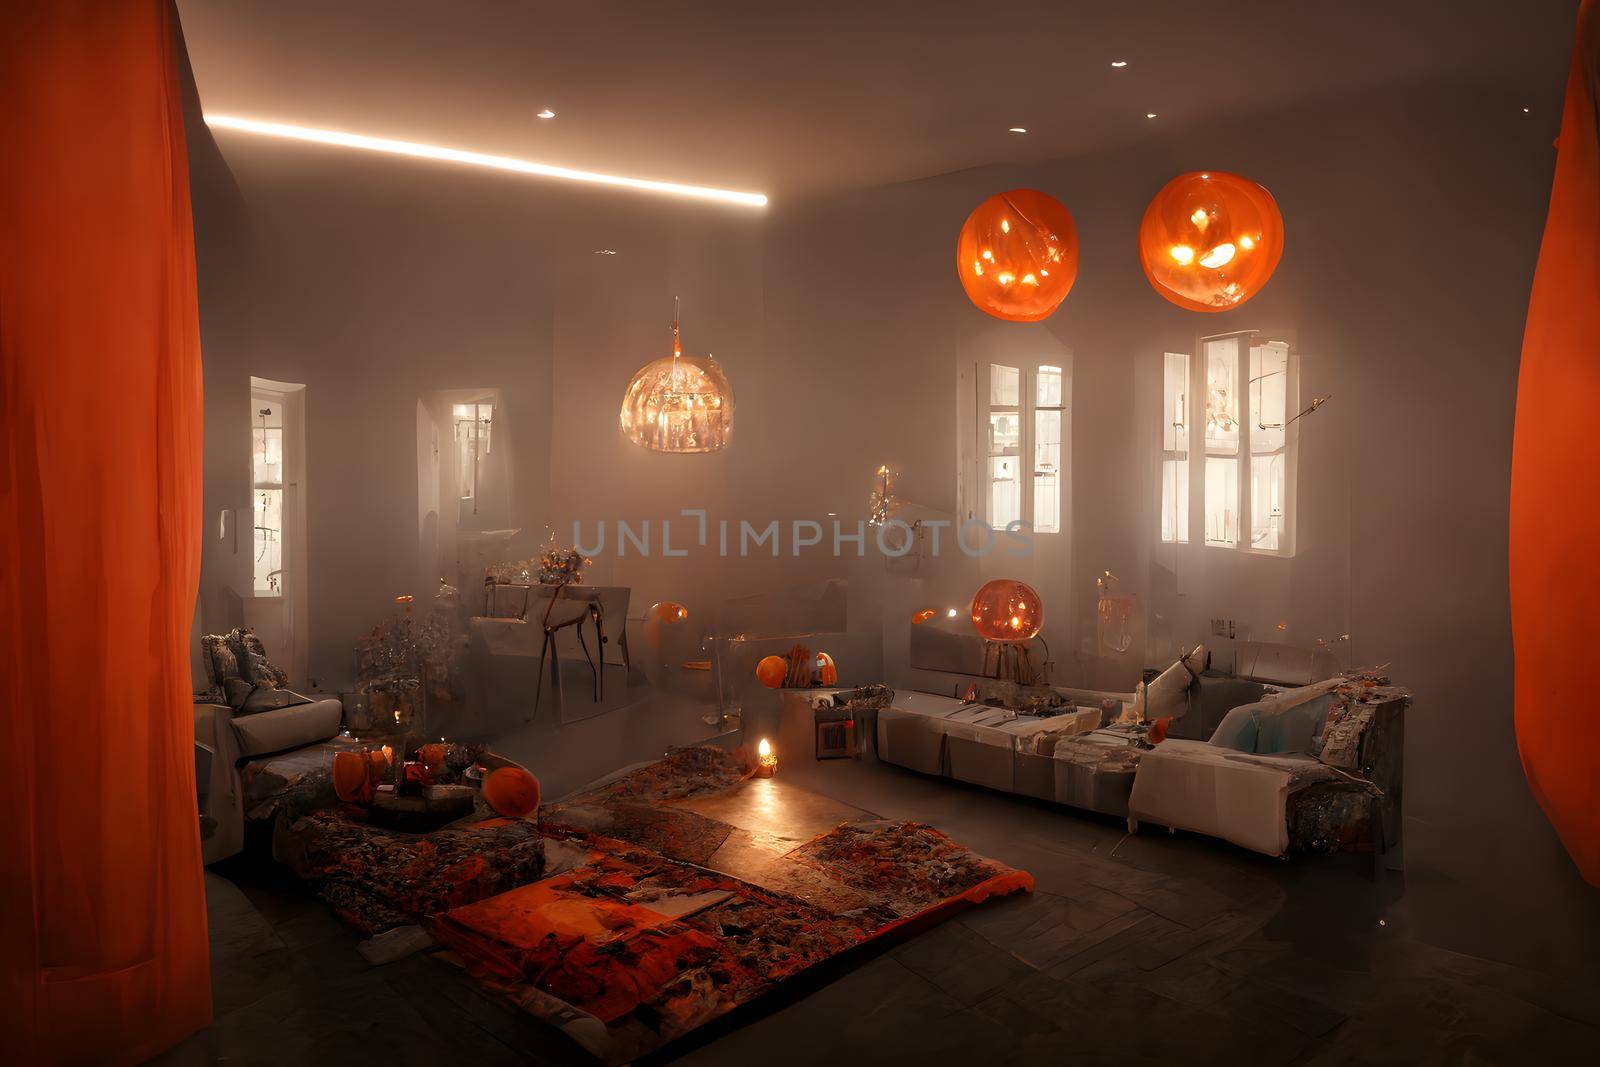 halloween decorated home interior with costumed figures, neural network generated art by z1b